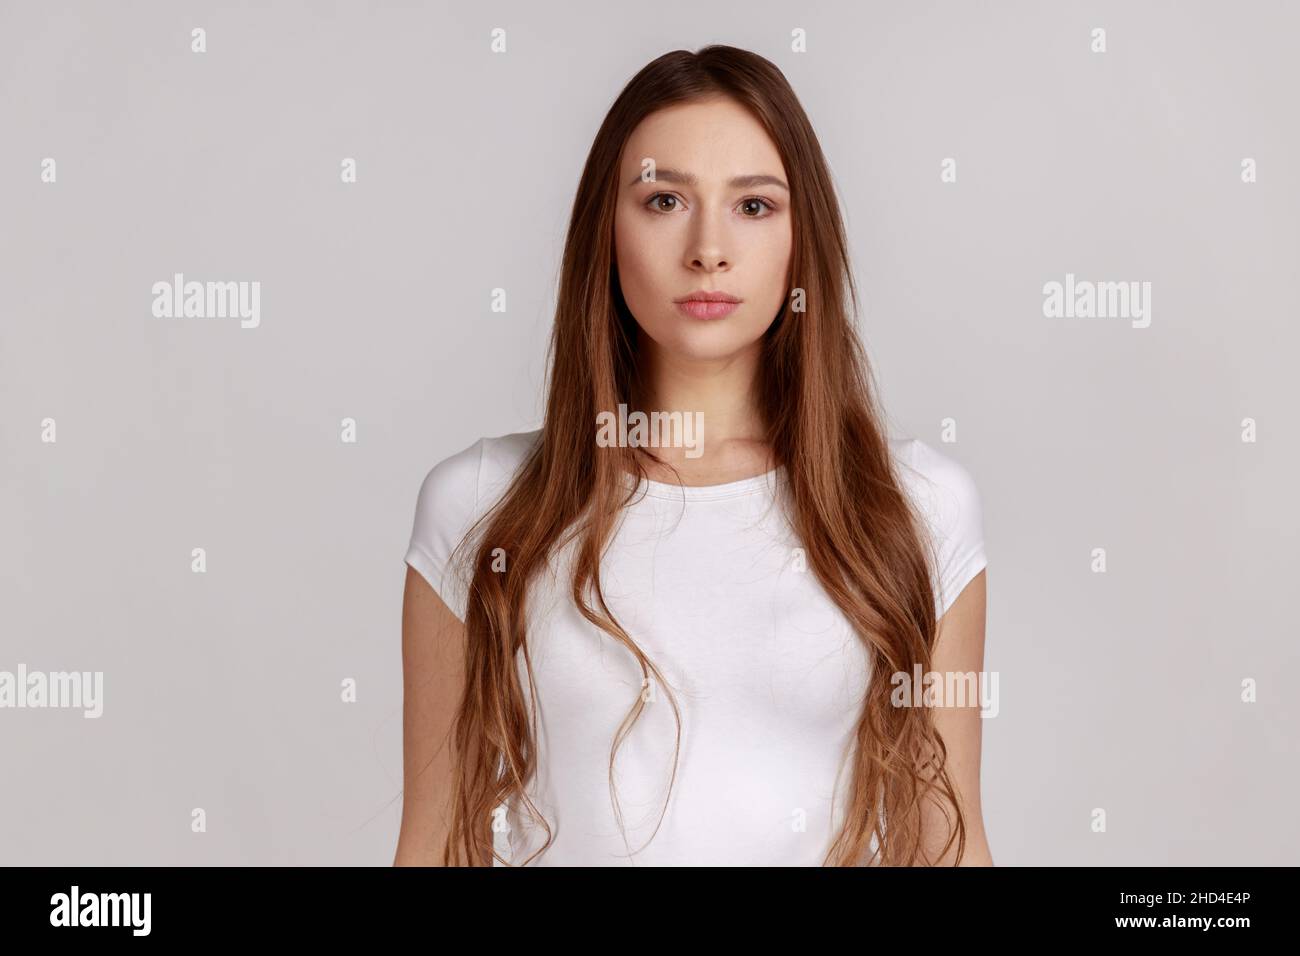 Portrait of strict attractive woman standing looking at camera, feels confident focused self-assured, expressing seriousness, wearing white T-shirt. Indoor studio shot isolated on gray background. Stock Photo